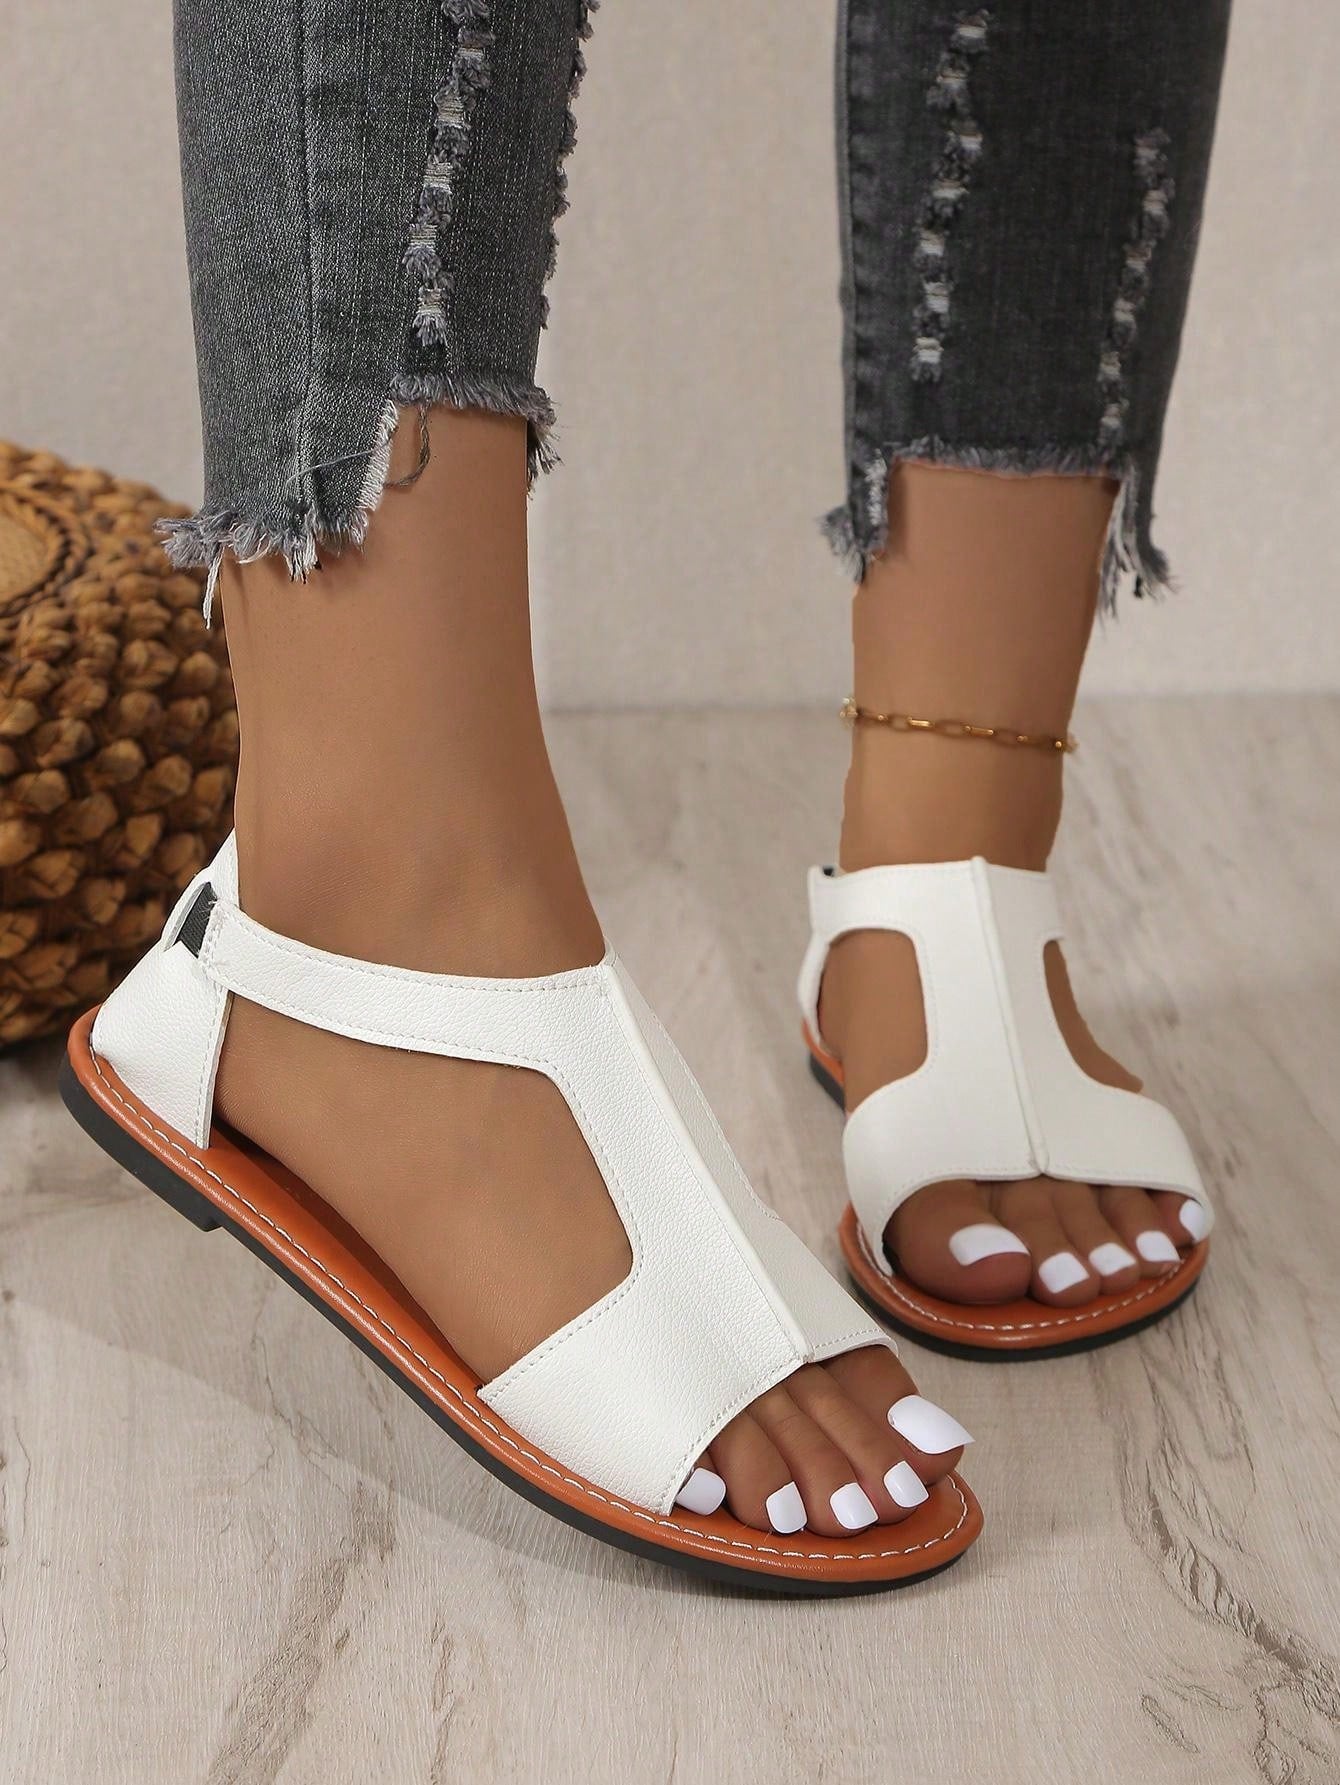 New Women Casual Comfortable Slip-On Flat Sandals With College Style Made Of Leather, Ideal For Beach Party And Music Festival-White-11